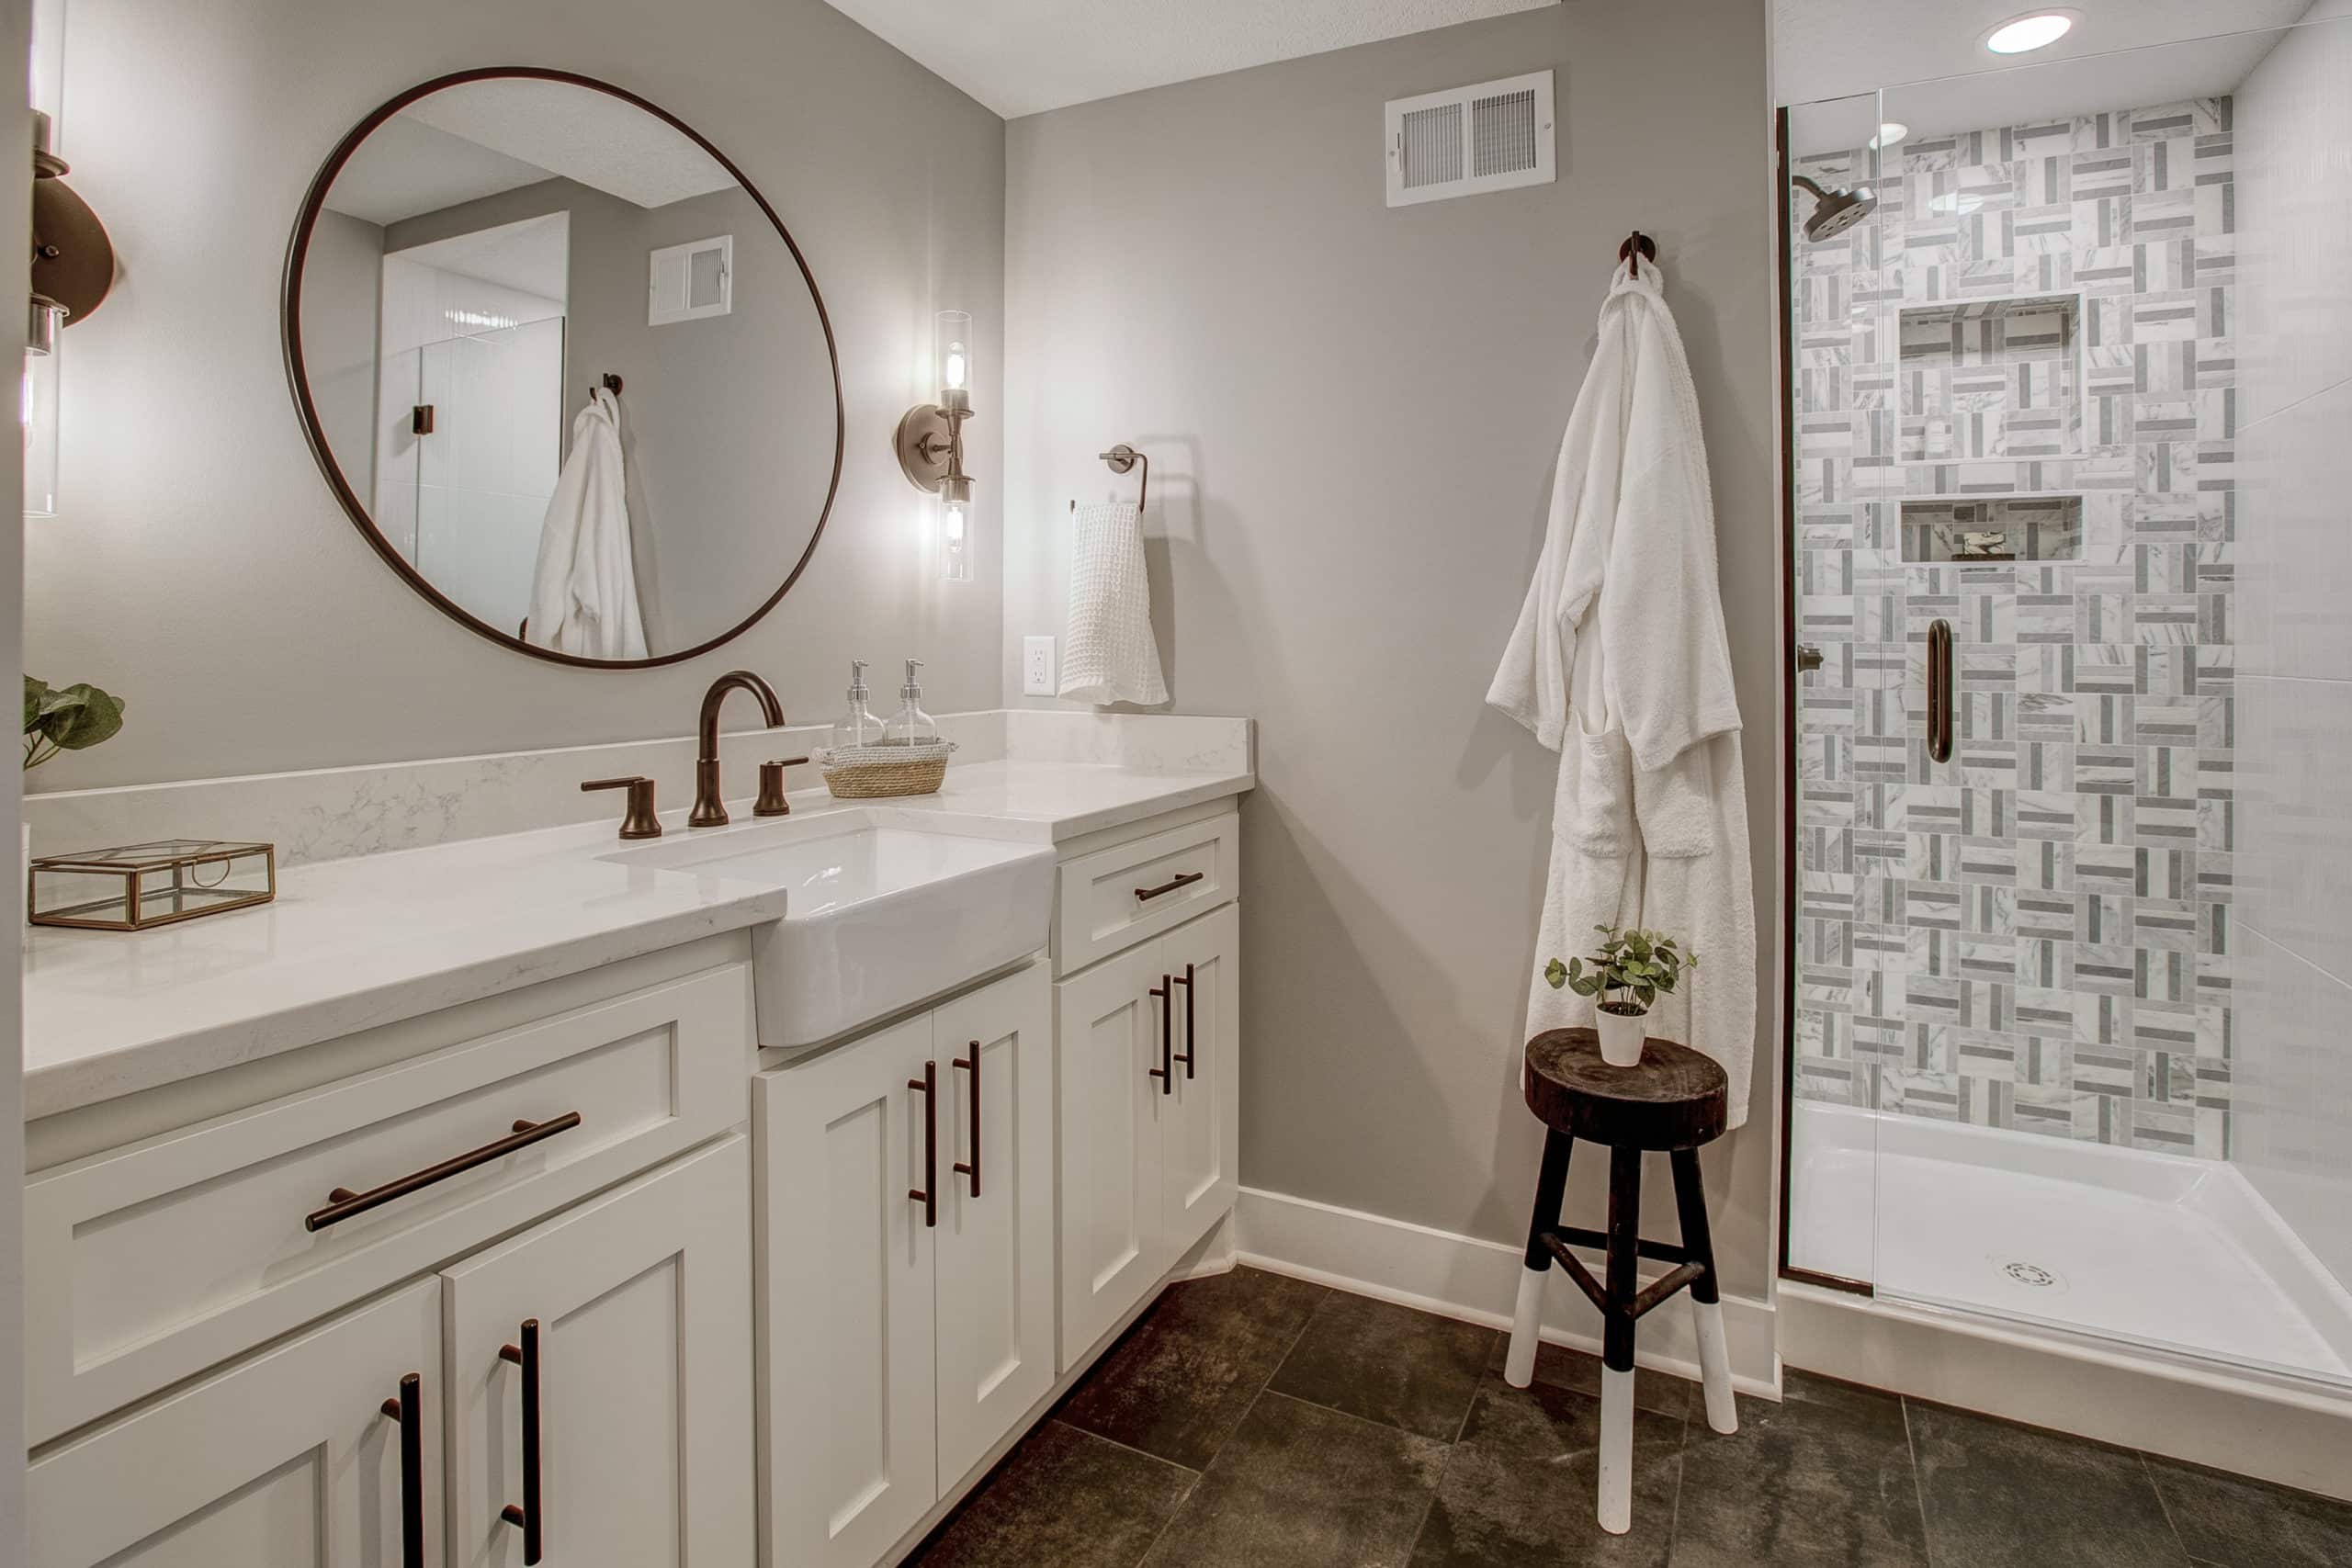 Remodeled bathroom with dual white sinks, with round mirror centered, and gold trim